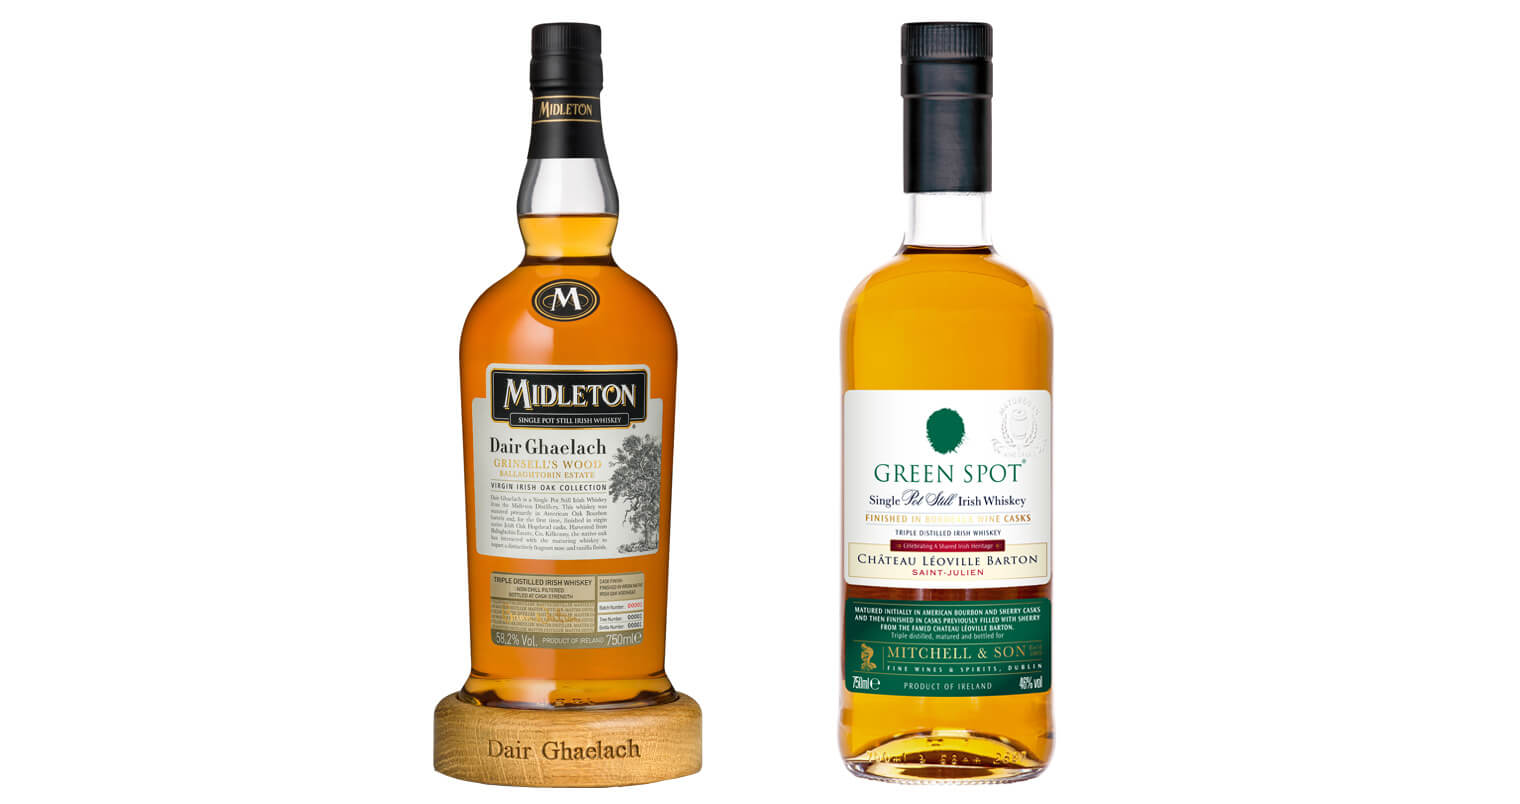 Pernod Ricard Debuts Two New Single Pot Still Irish Whiskey Expressions, featured brands, featured image